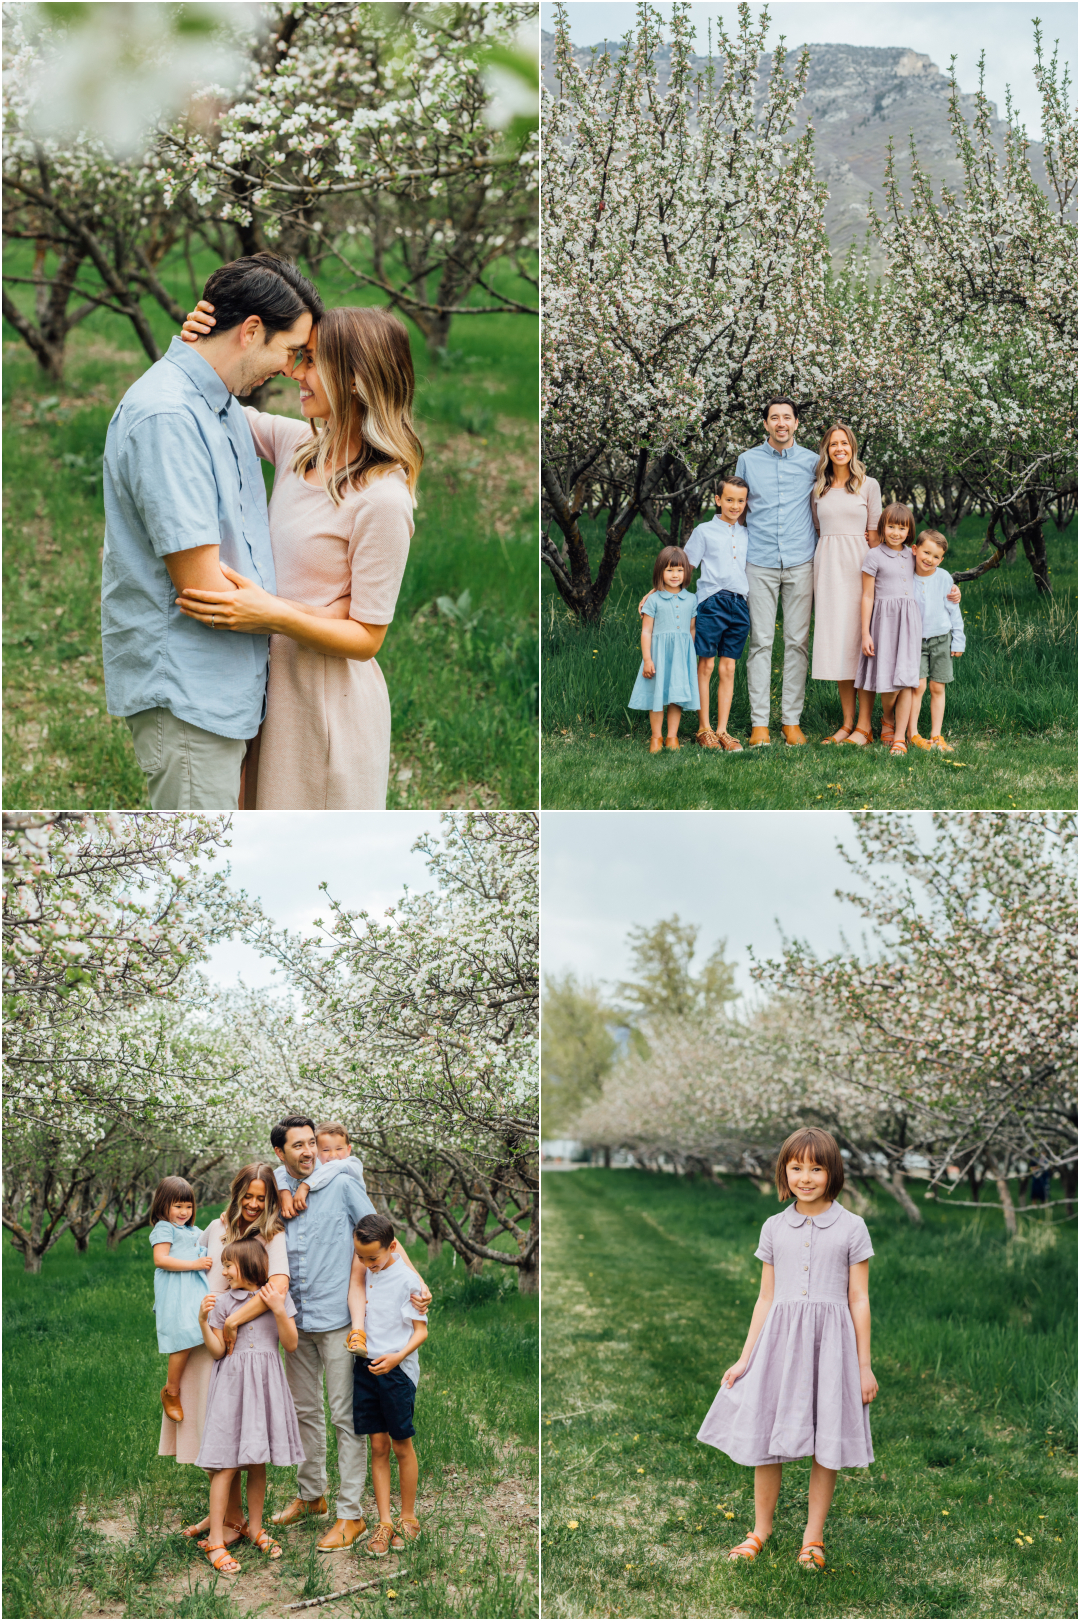 Utah Spring Family Photography Locations in Utah County - Provo Orchard